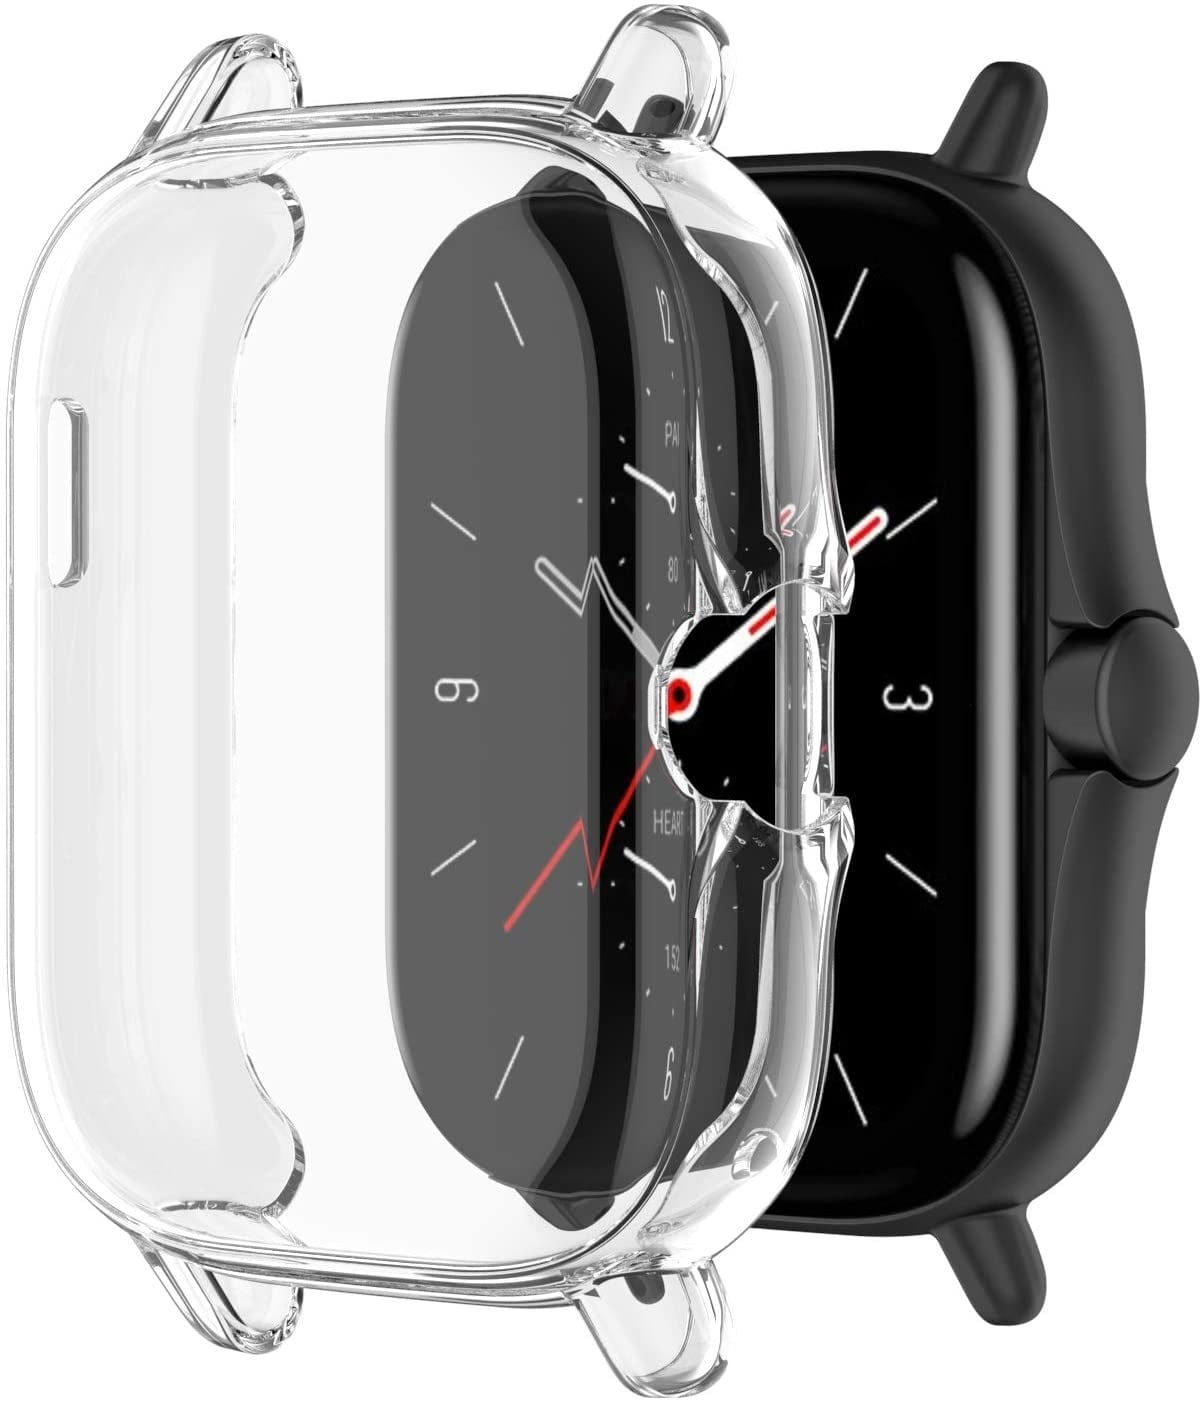  TenCloud Cases Intended for Amazfit GTS 4 Watch Case